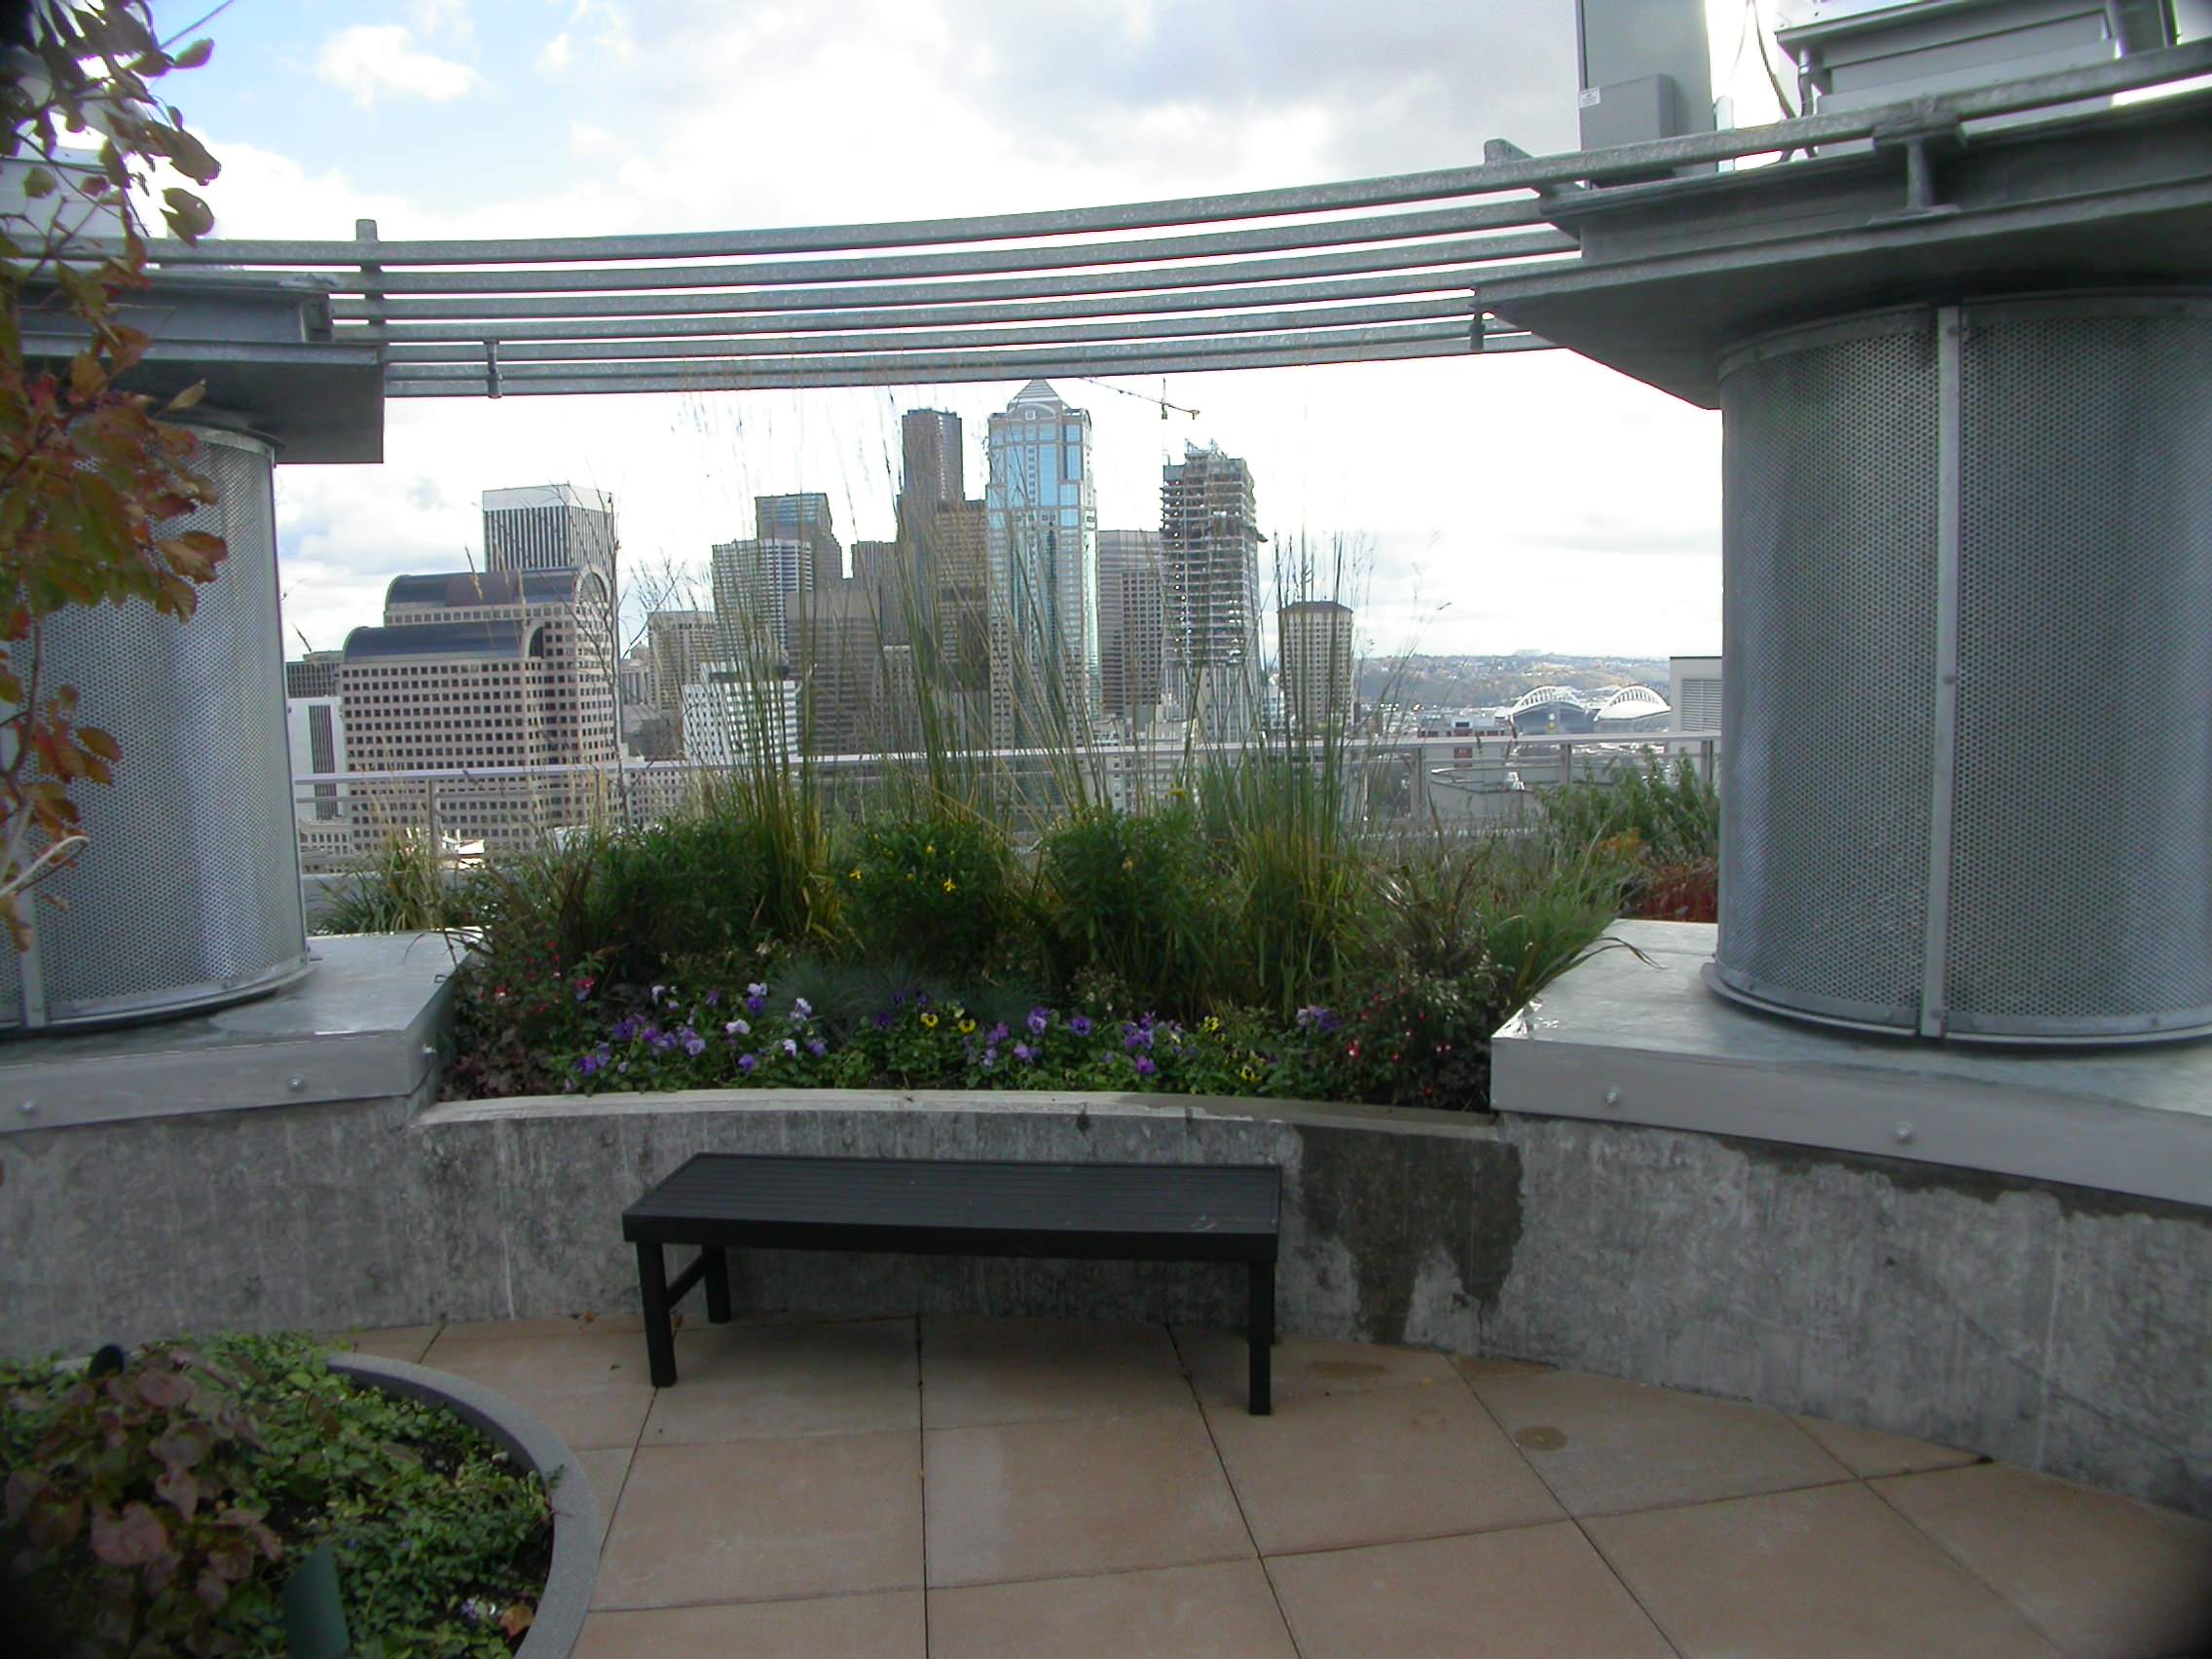 Cristalla Roof Garden - arbor and plantings framing the view